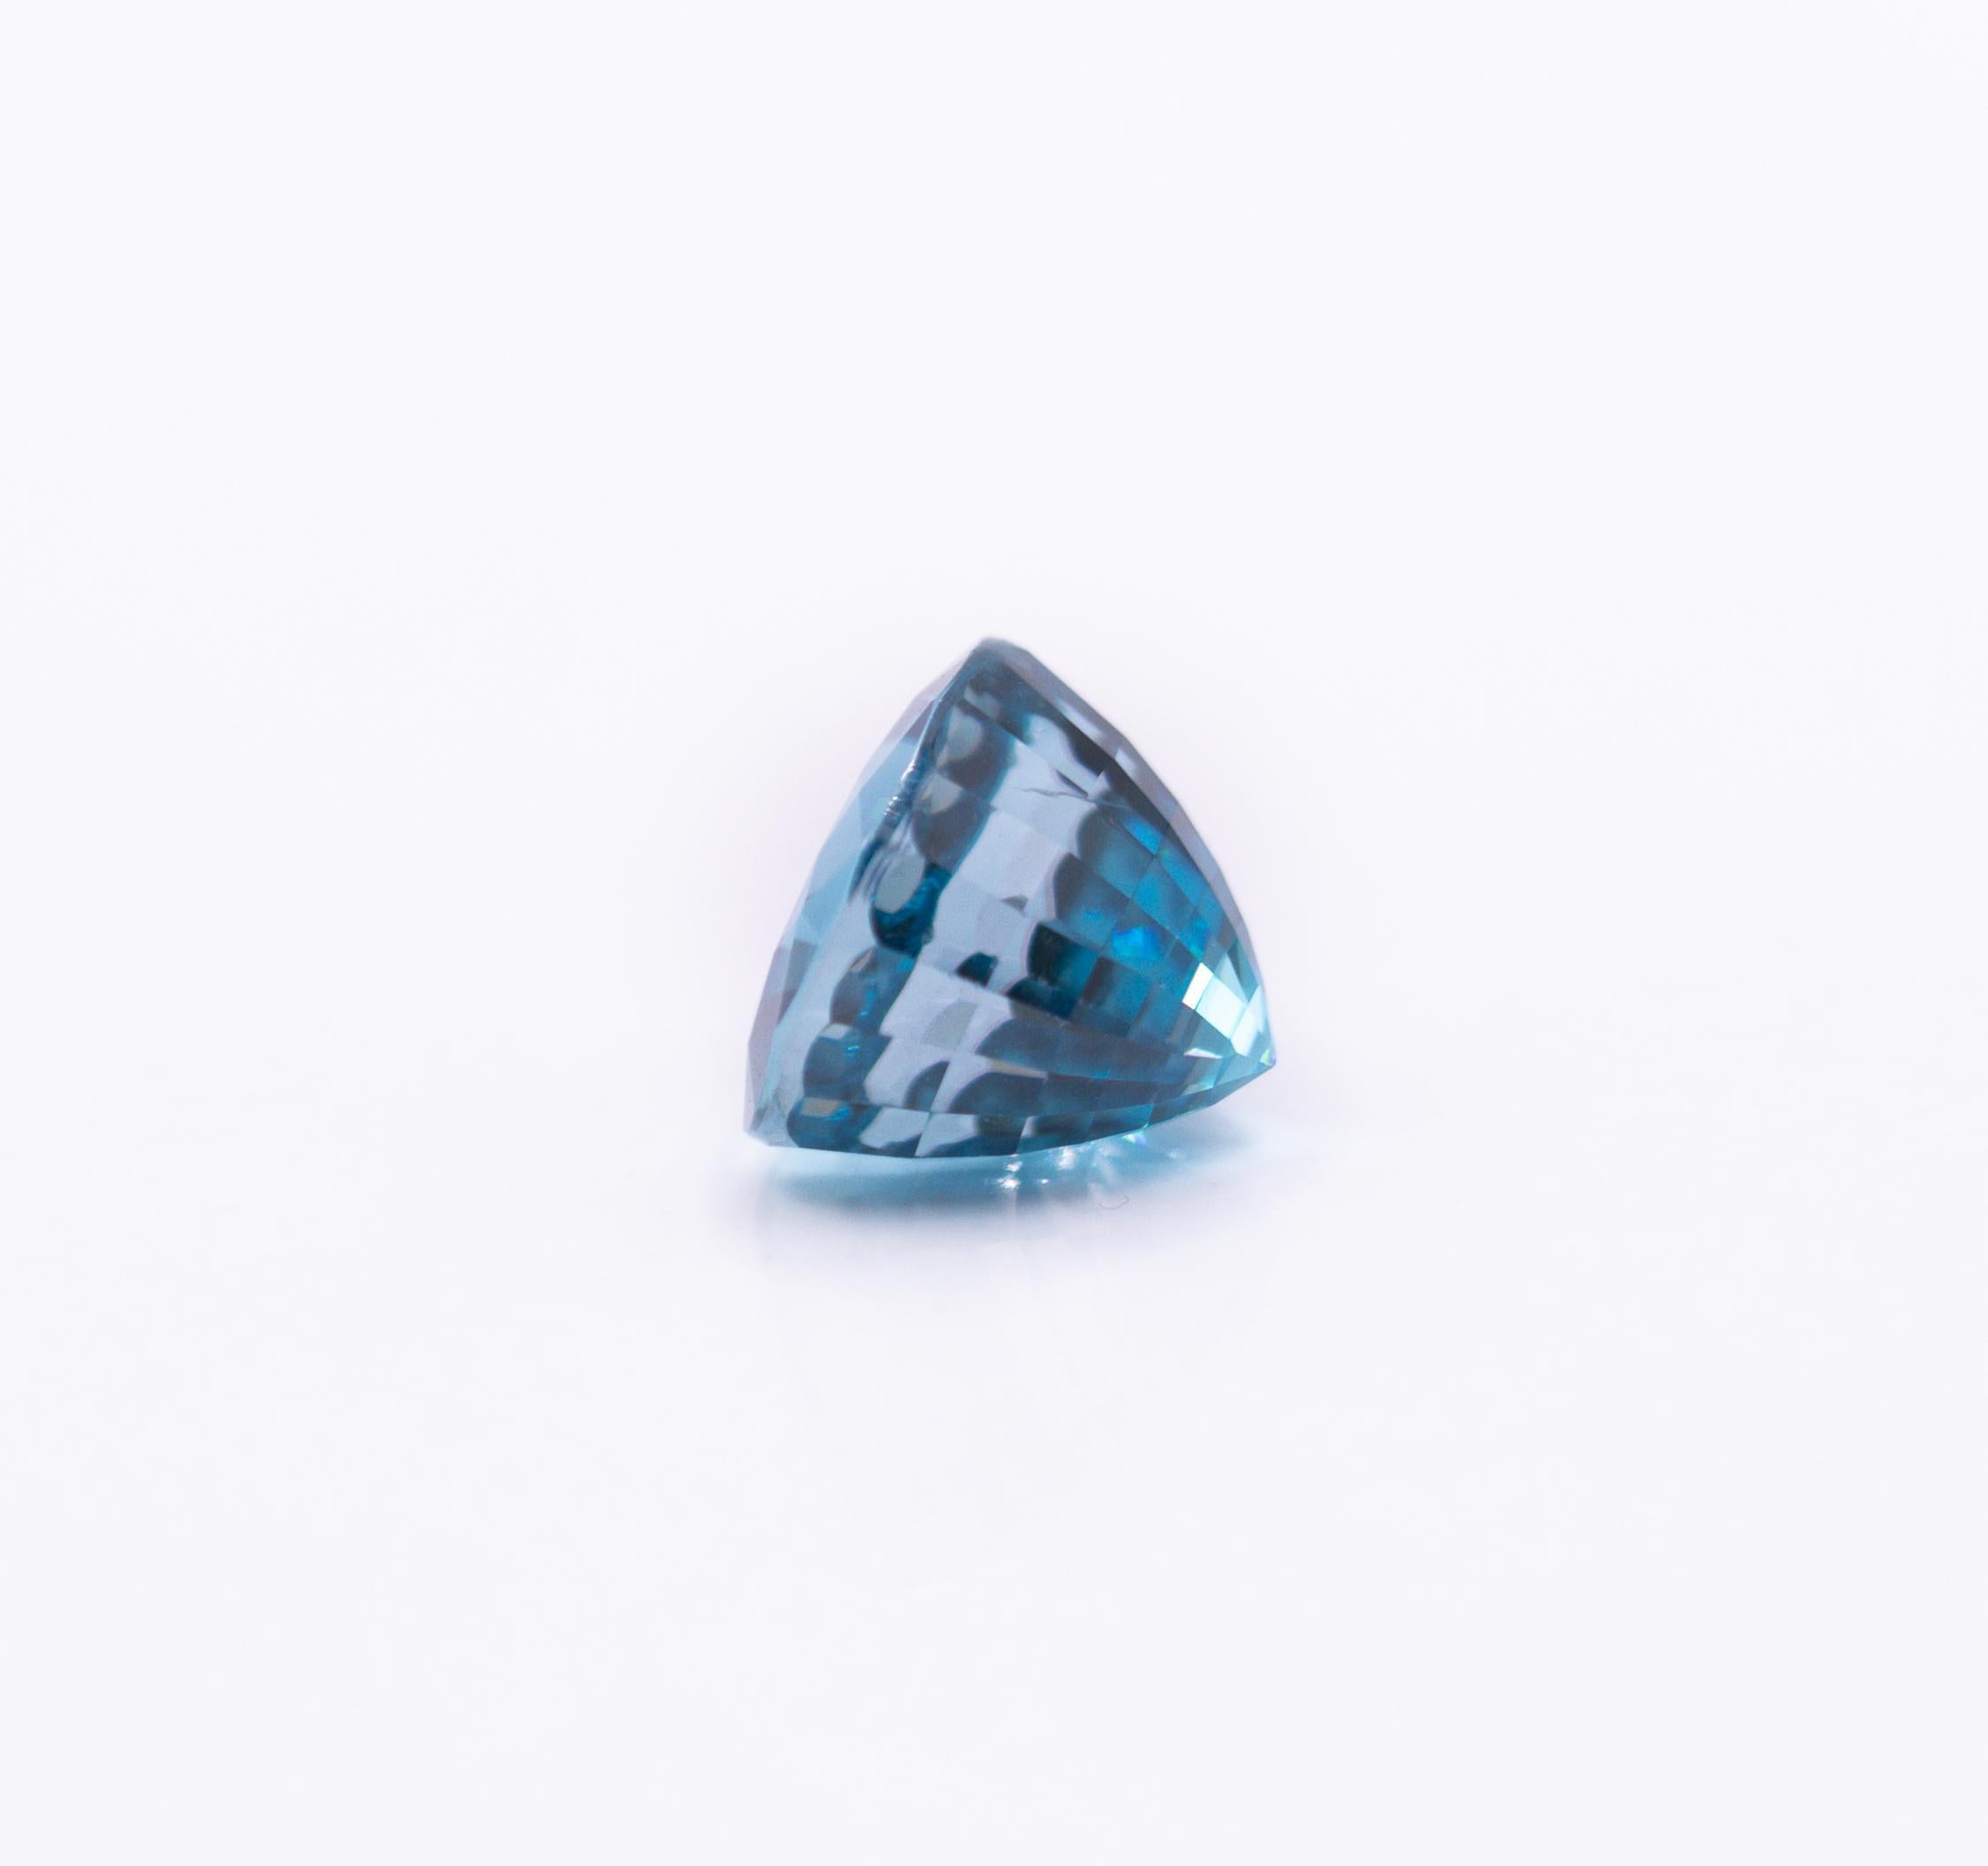 Vivid 5 Carat Blue Zircon Gemstone  Cushion 8.5x7mm In New Condition For Sale In Columbus, OH